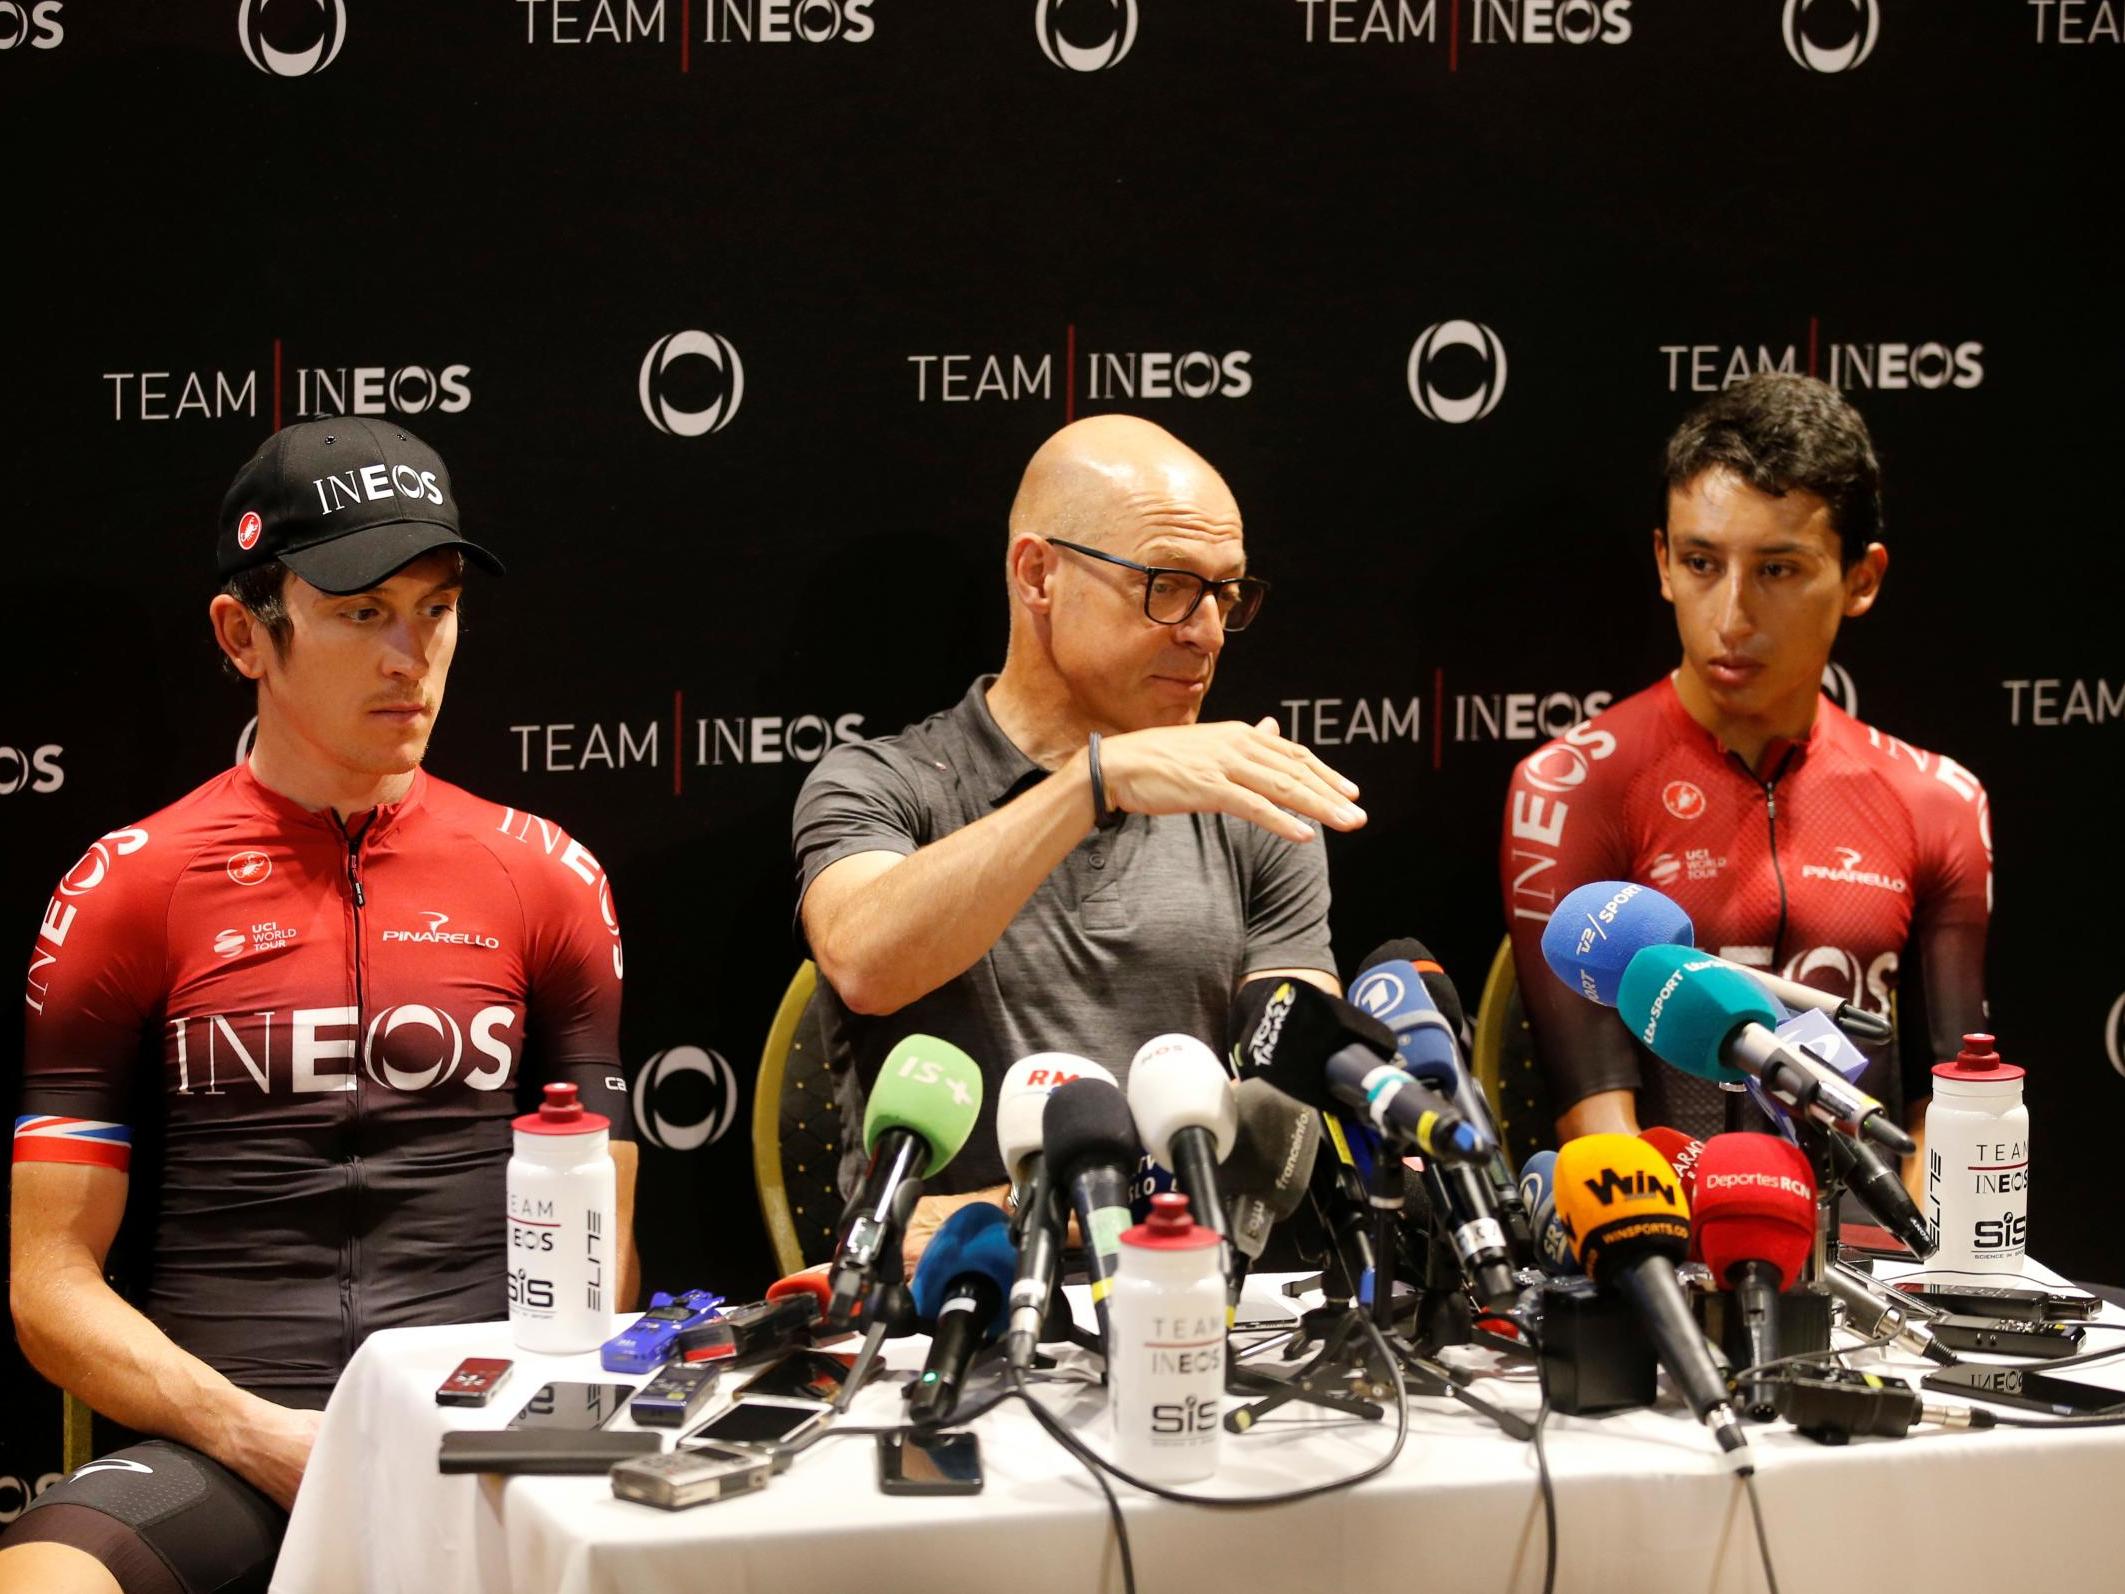 Dave Brailsford talks to reporters on the second rest day